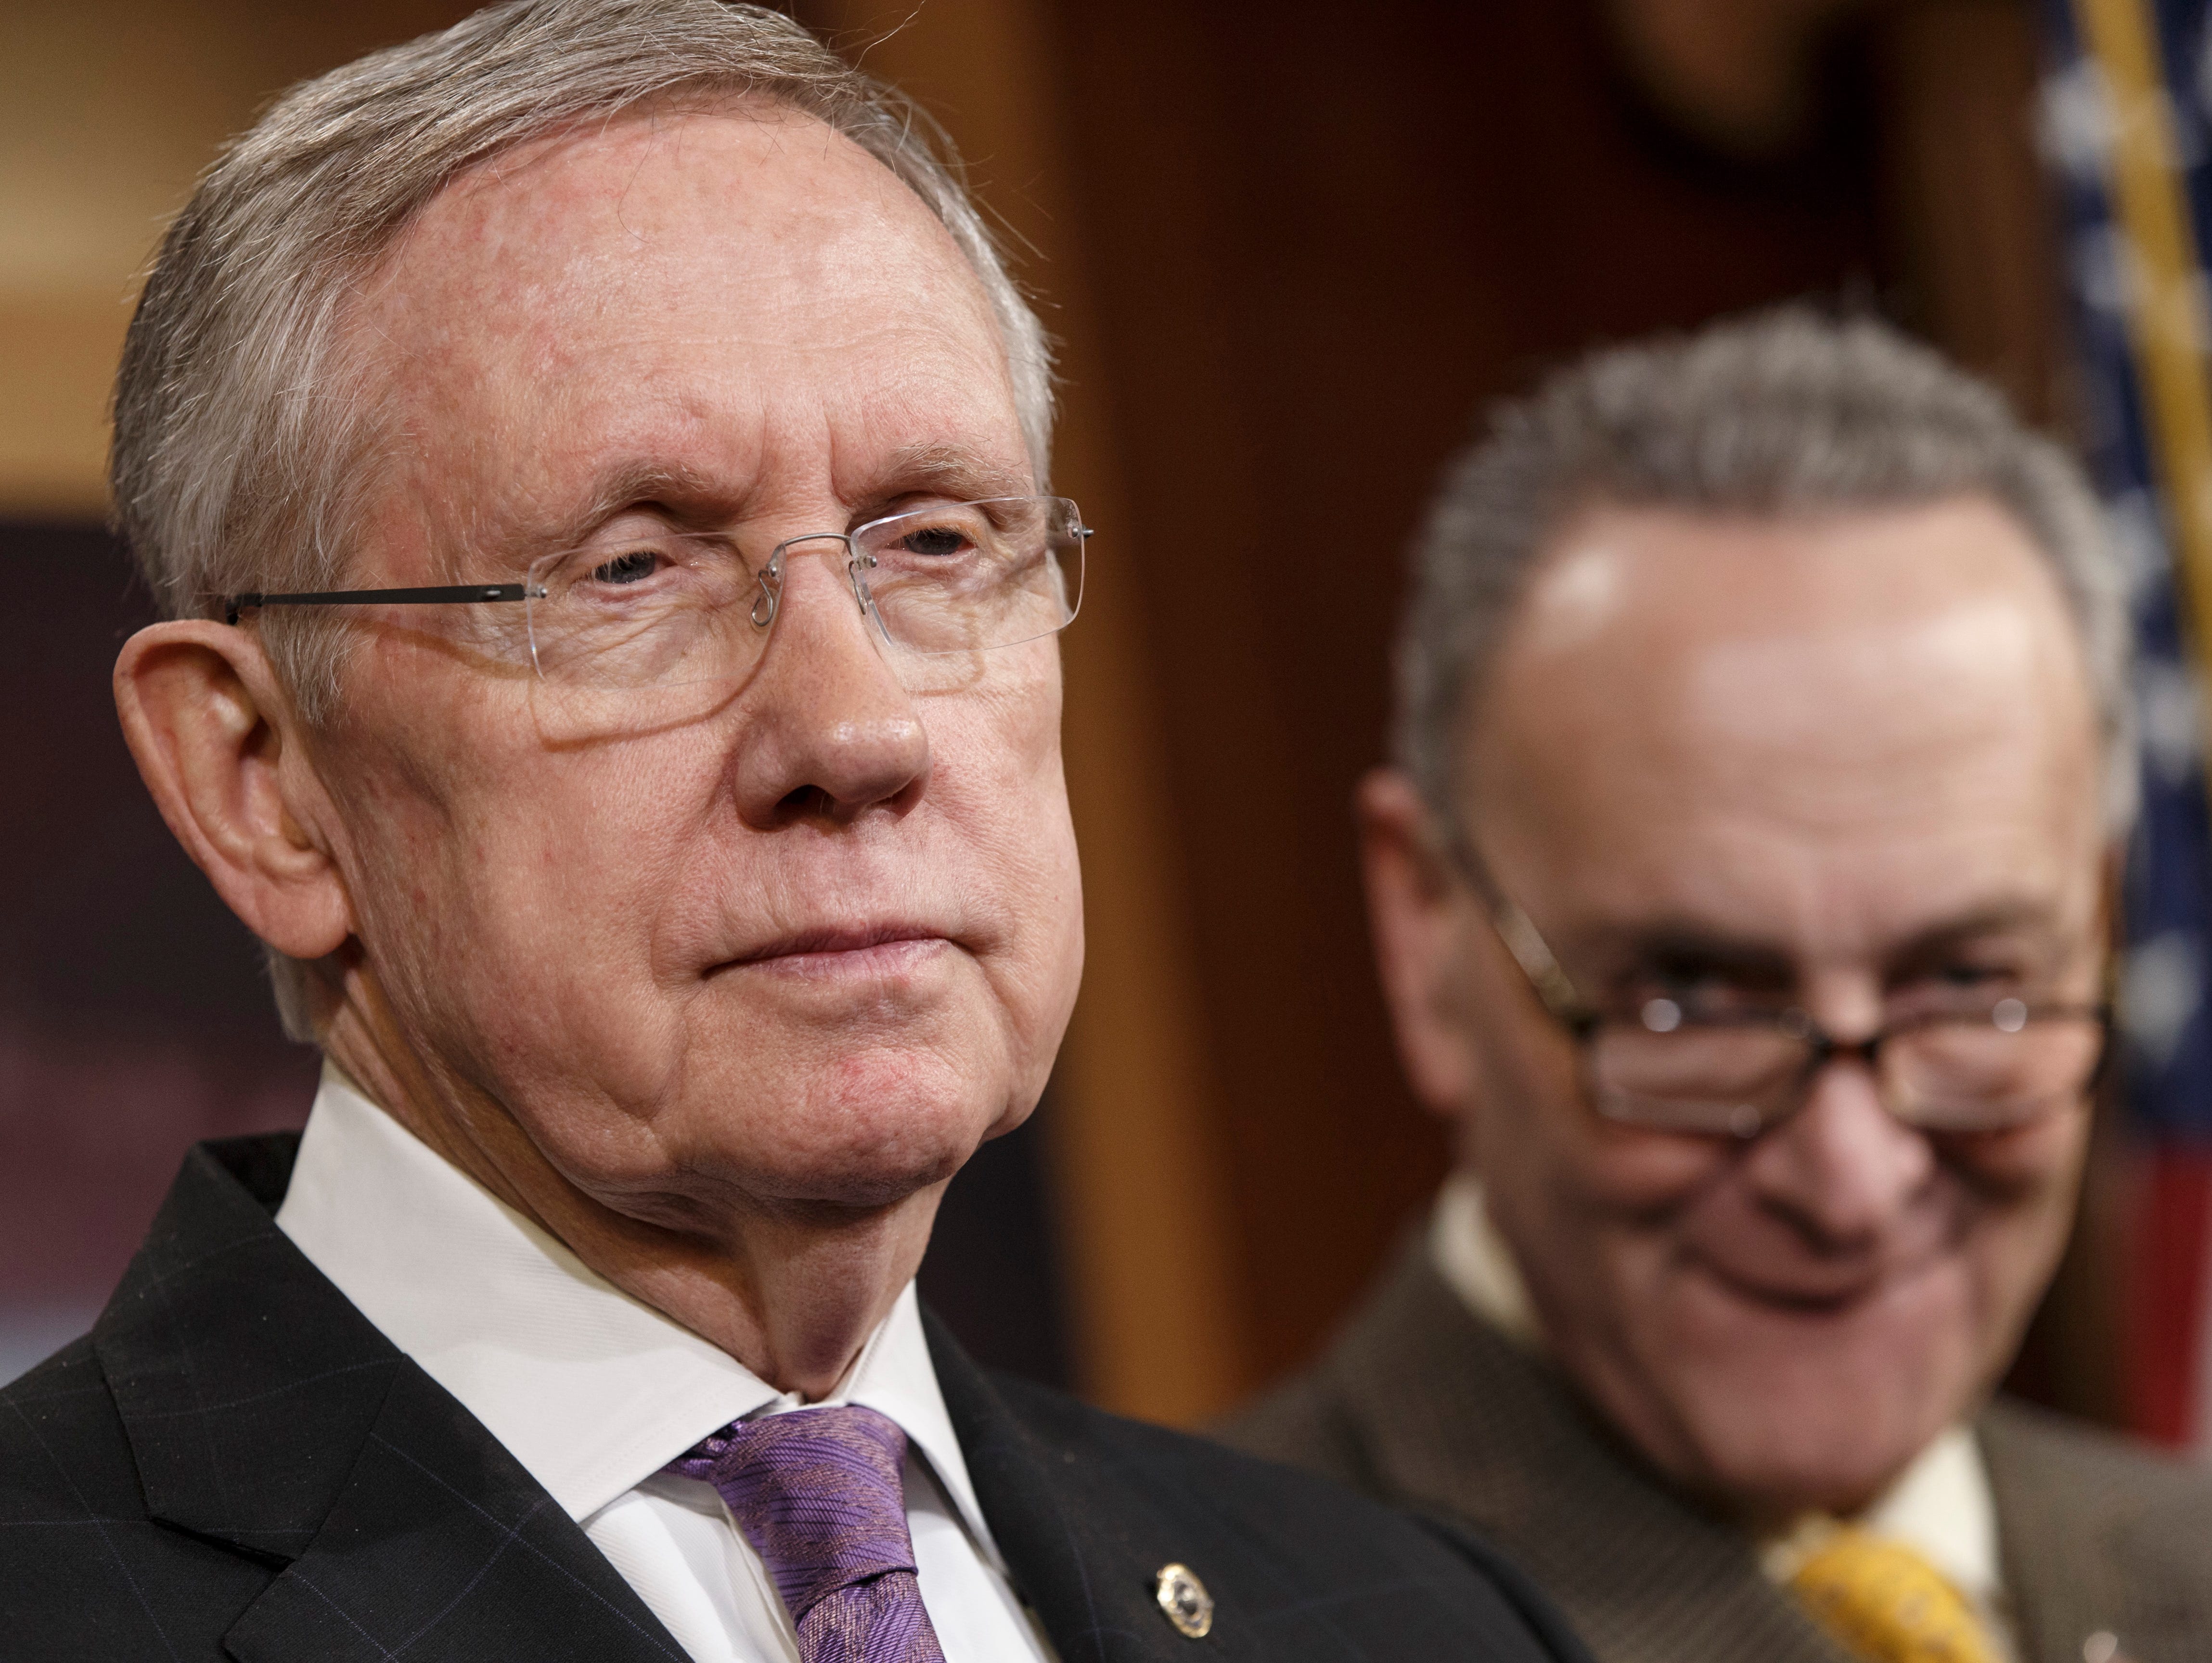 Senate Minority Leader Harry Reid, D-Nev., left, accompanied by Sen. Chuck Schumer, D-N.Y., listens during a news conference on Capitol Hill.